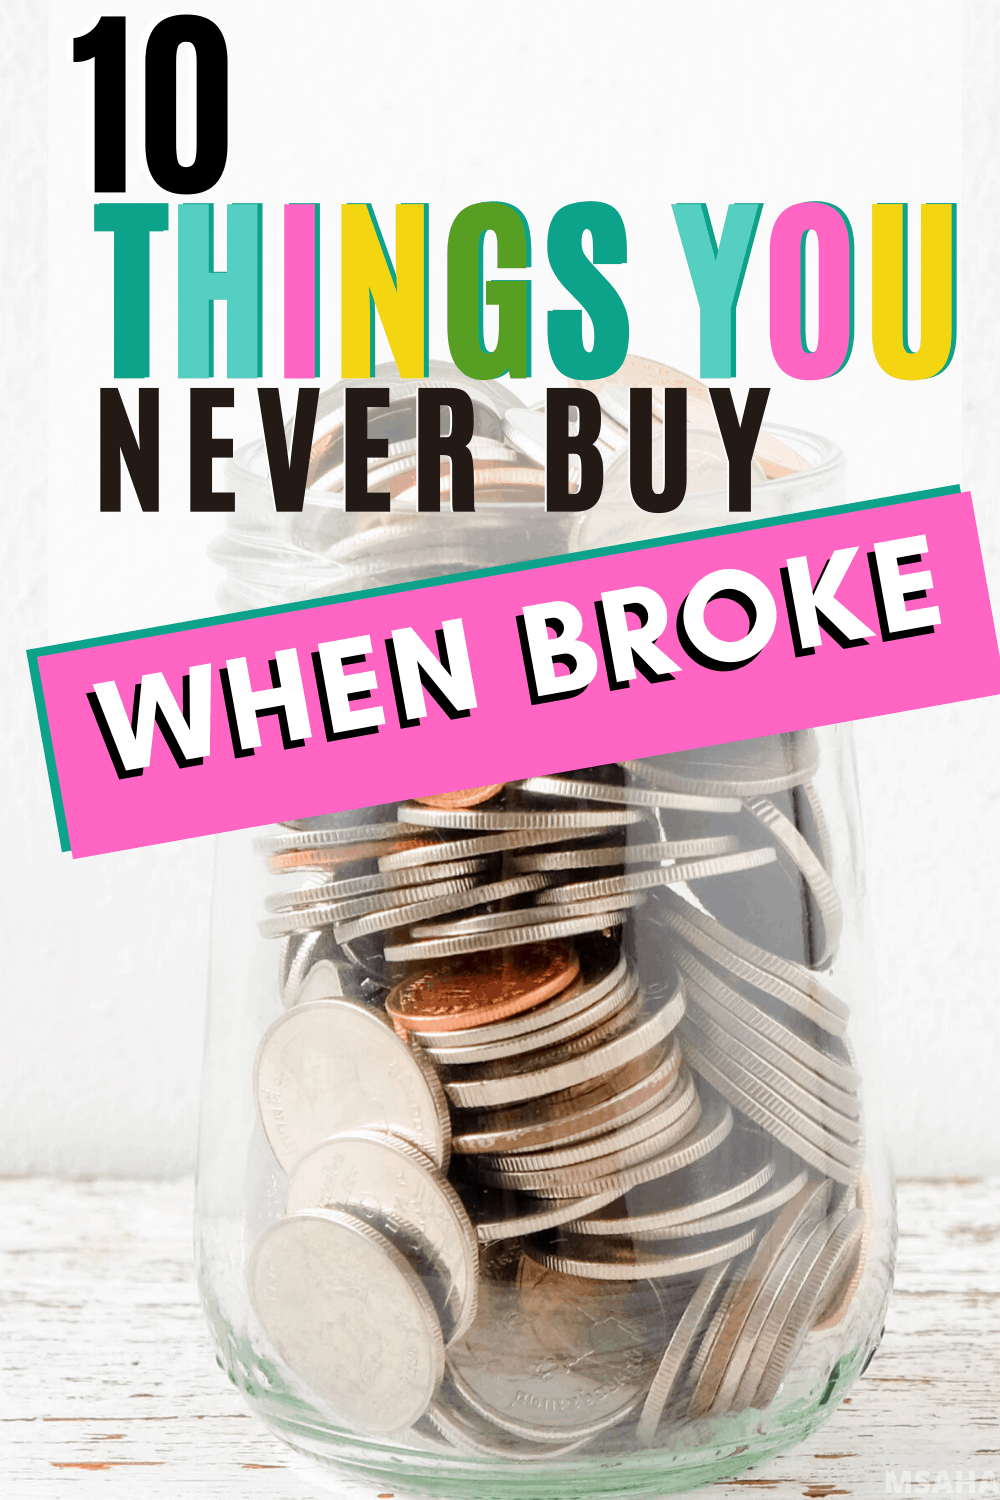 When you are having money problems there are ten things you should never buy when struggling financially that you can live without and use that money to do this instead. #money #moneytips #finances #moneysavingtips via @mystayathome